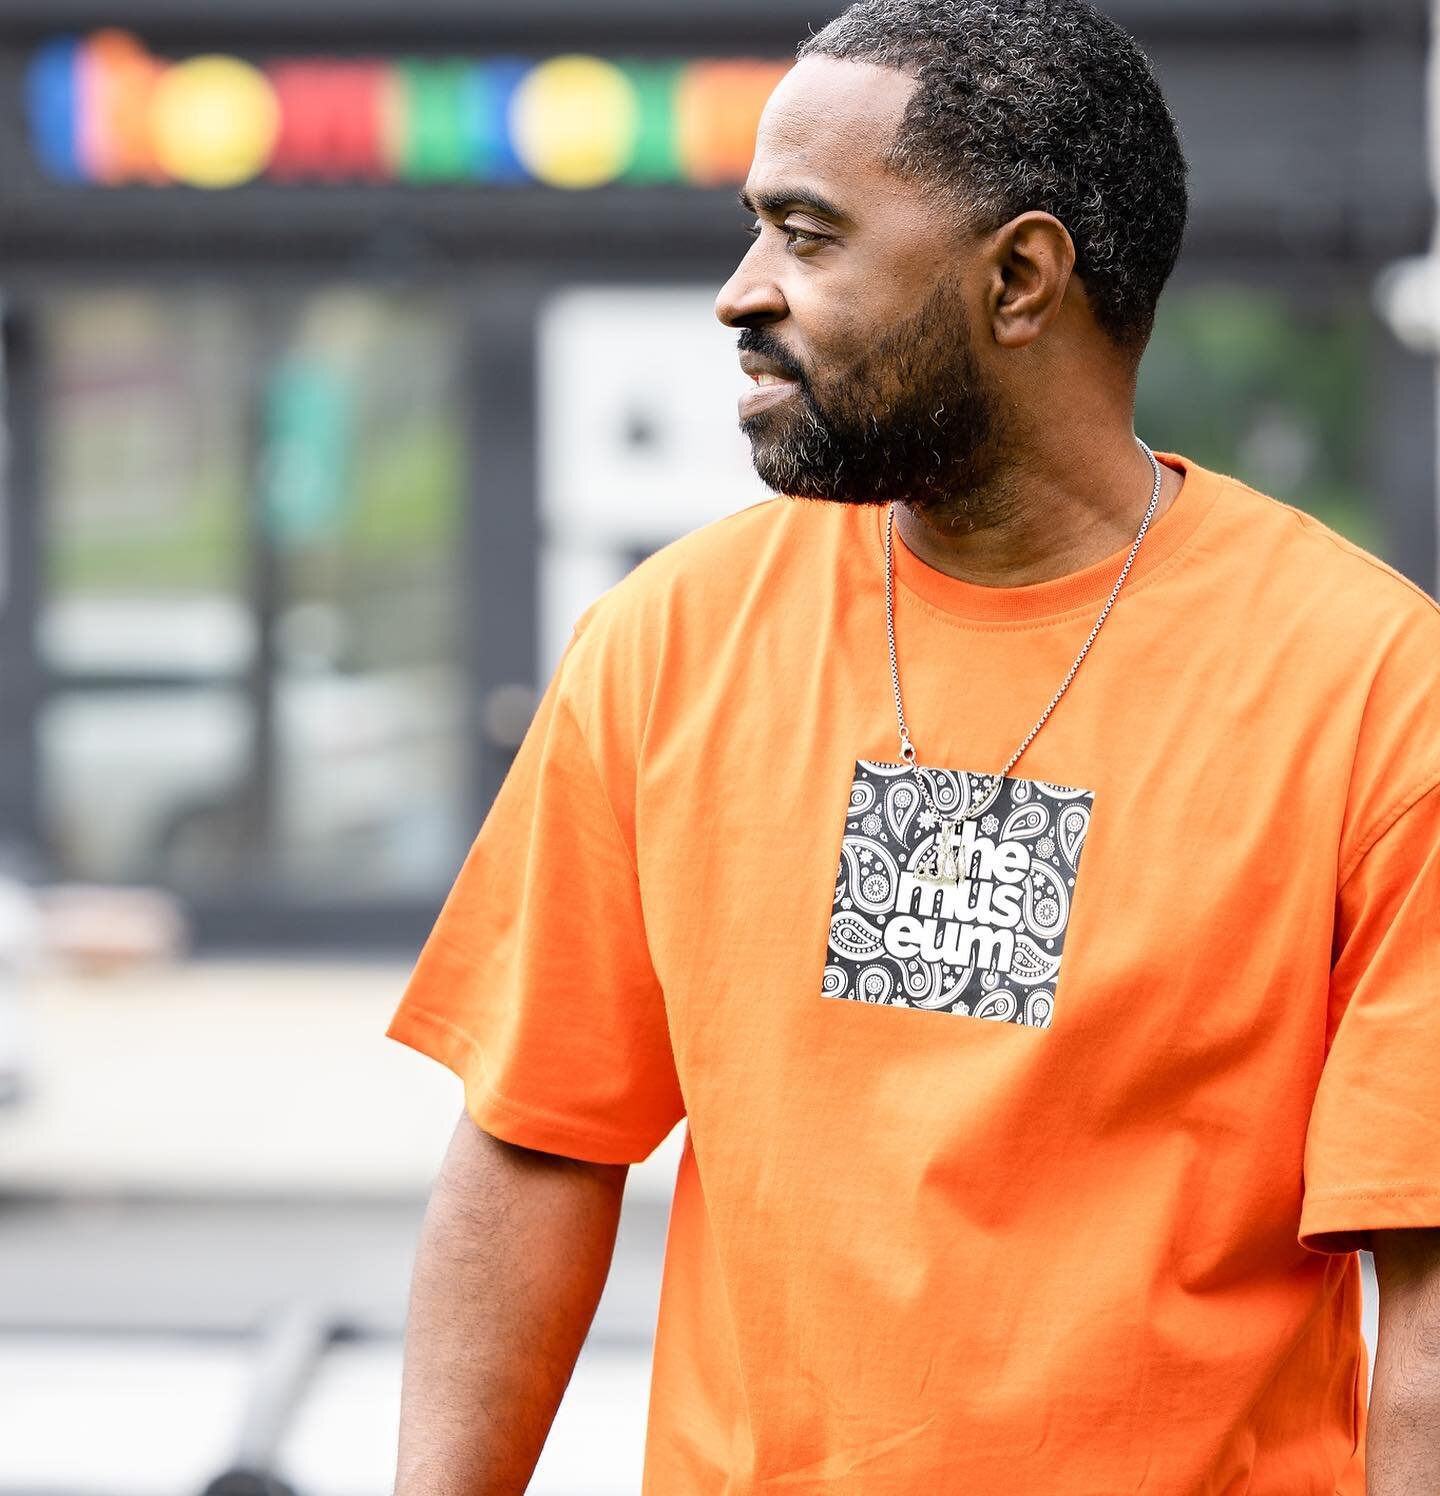 Come on in today and grab our orange bandanna box logo t-shirt in store. We are open from 1pm-6pm. 2014 Rhode Island Ave. NE.